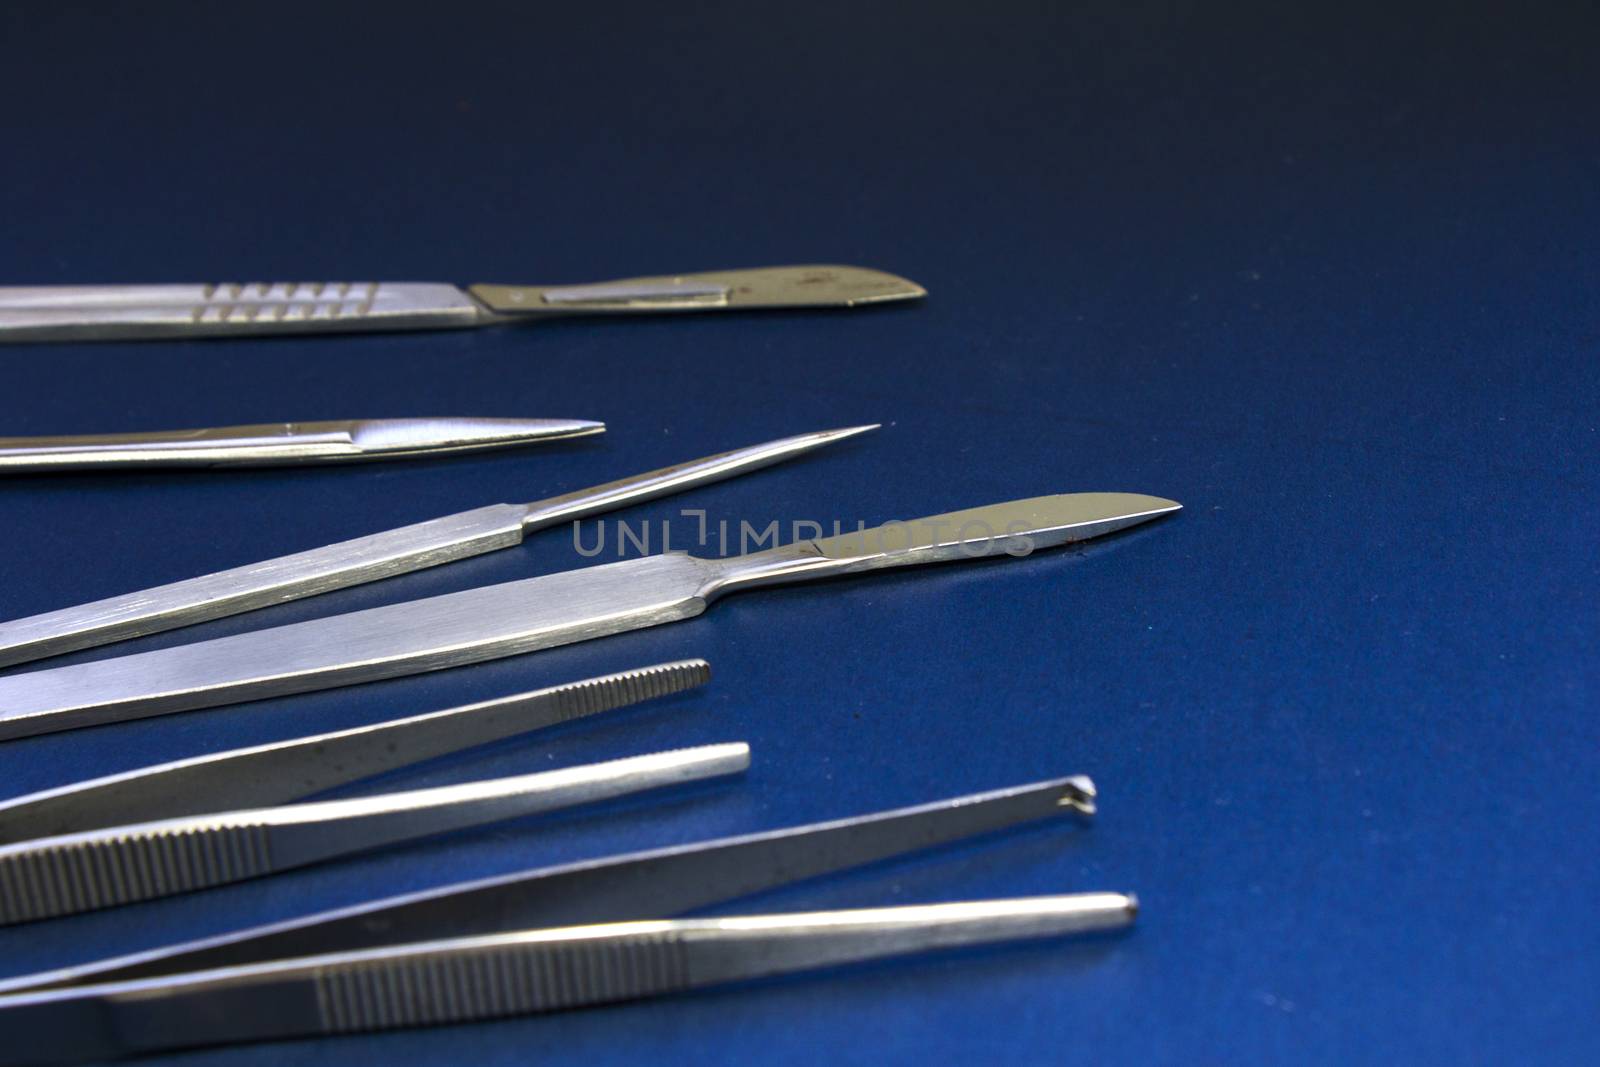 Dissection Kit - Premium Quality Stainless Steel Tools for Medical Students by Taidundua